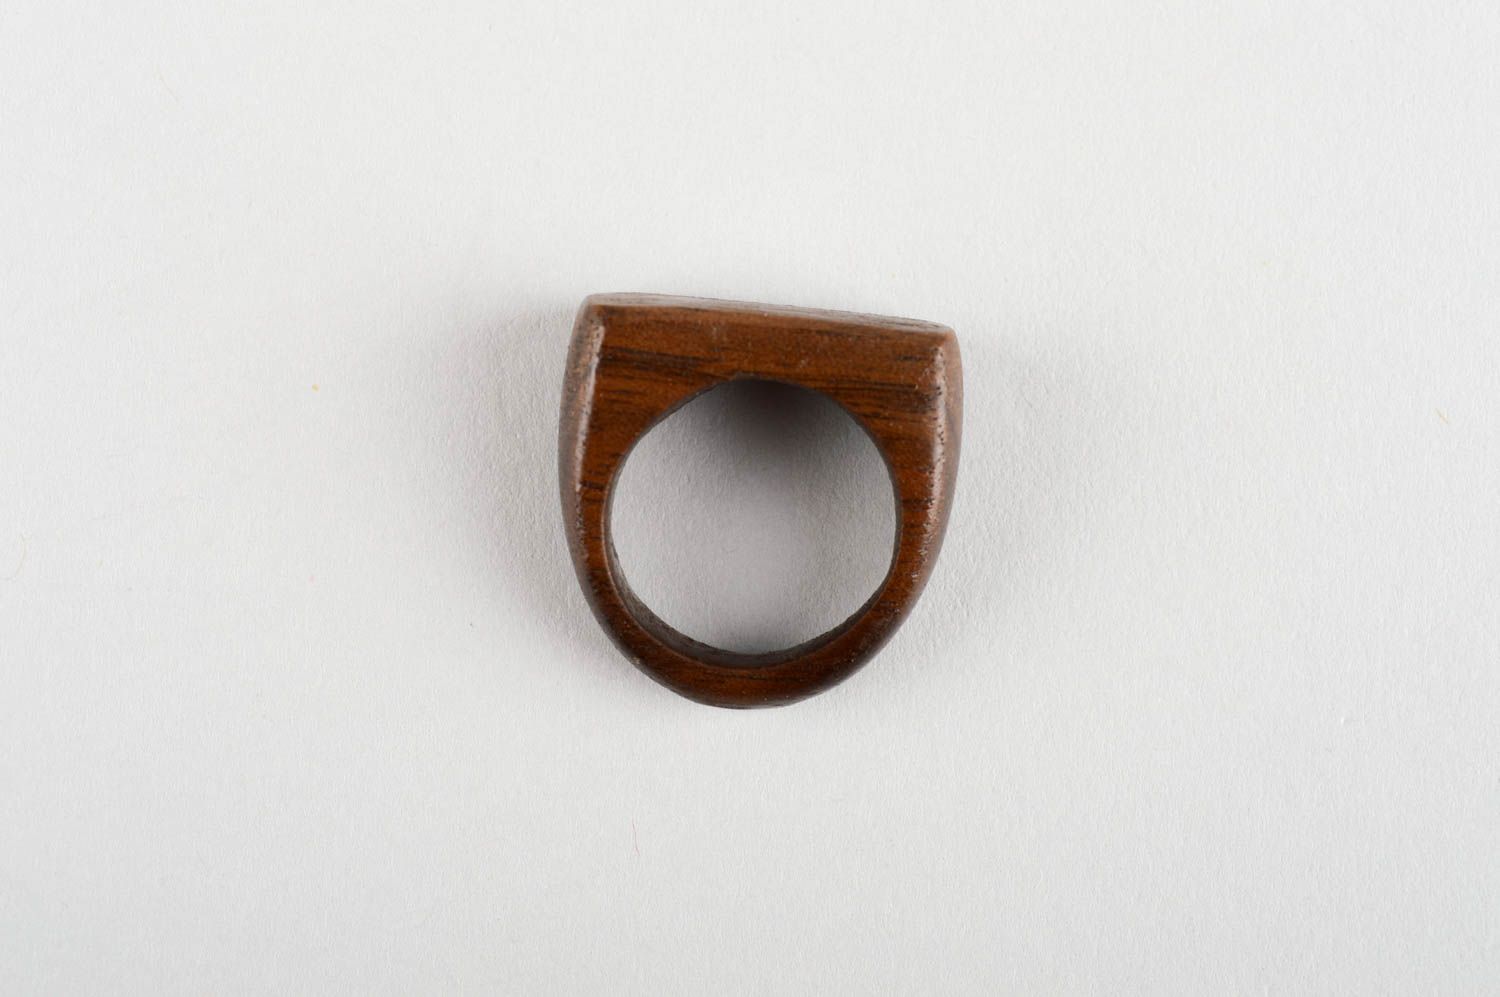 Unusual handmade womens ring wooden ring fashion trends wood craft ideas photo 4